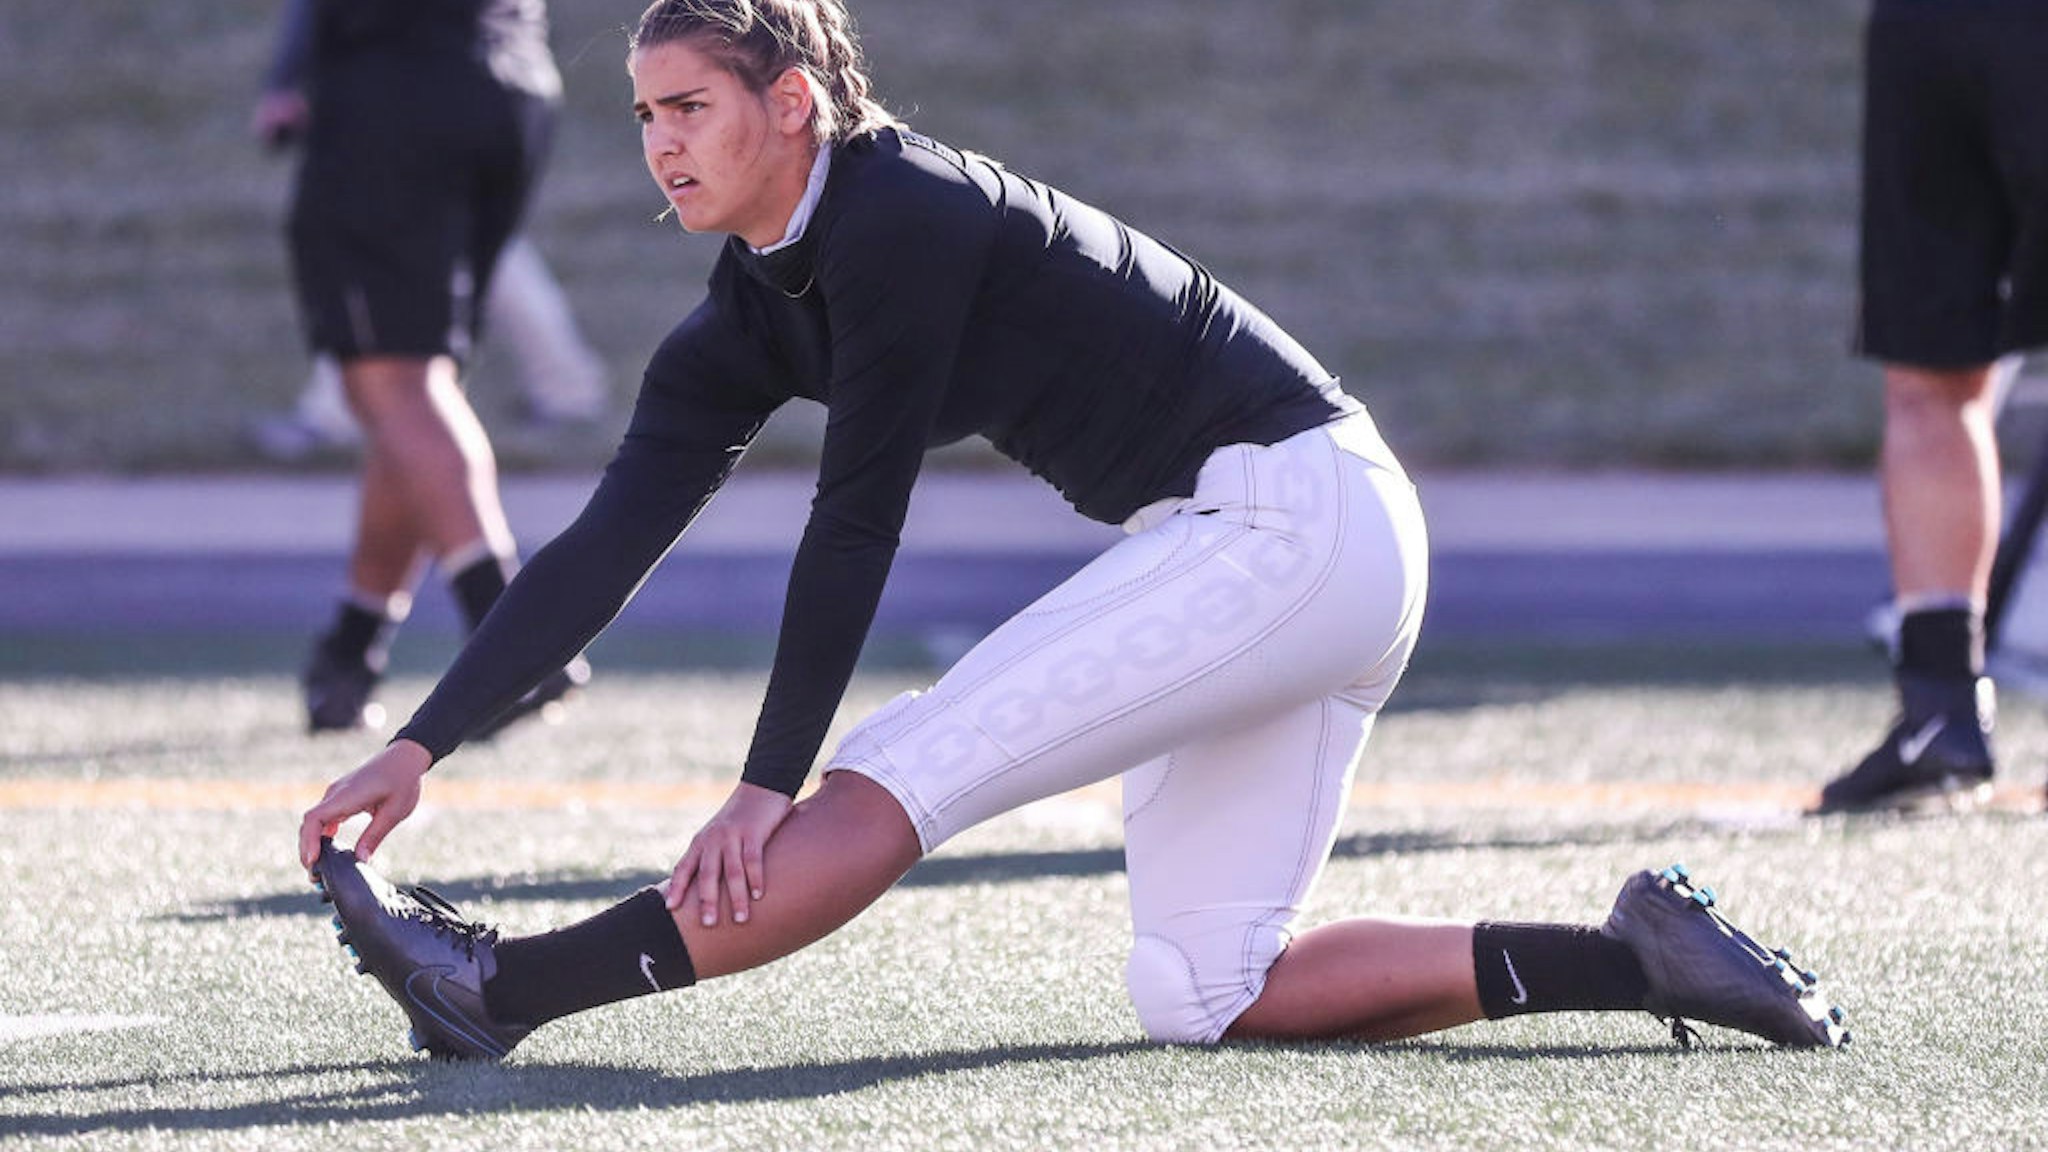 Sarah Fuller #32 of the Vanderbilt Commodores warms up prior to the game against the Missouri Tigers at Farout Field on November 28, 2020 in Columbia, Missouri.